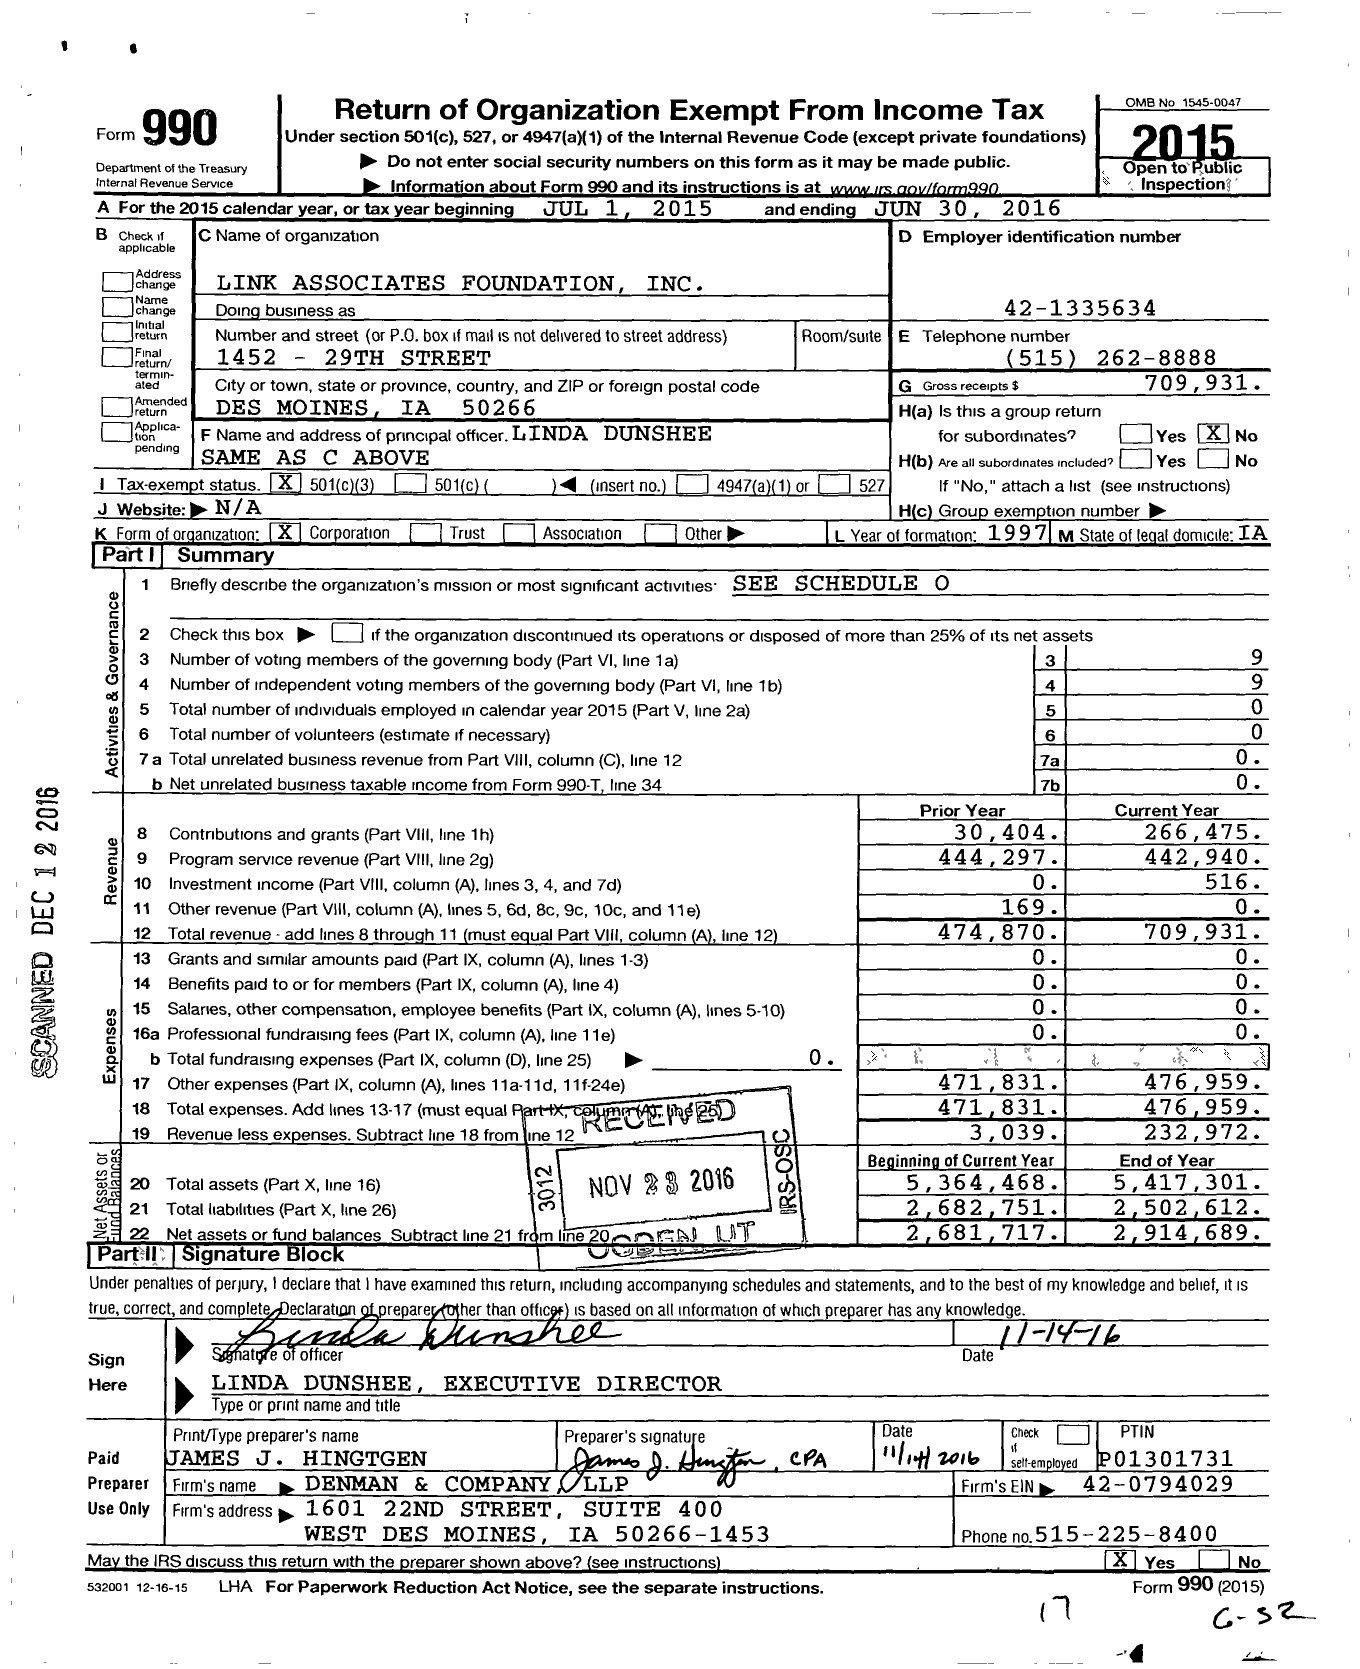 Image of first page of 2015 Form 990 for Link Associates Foundation